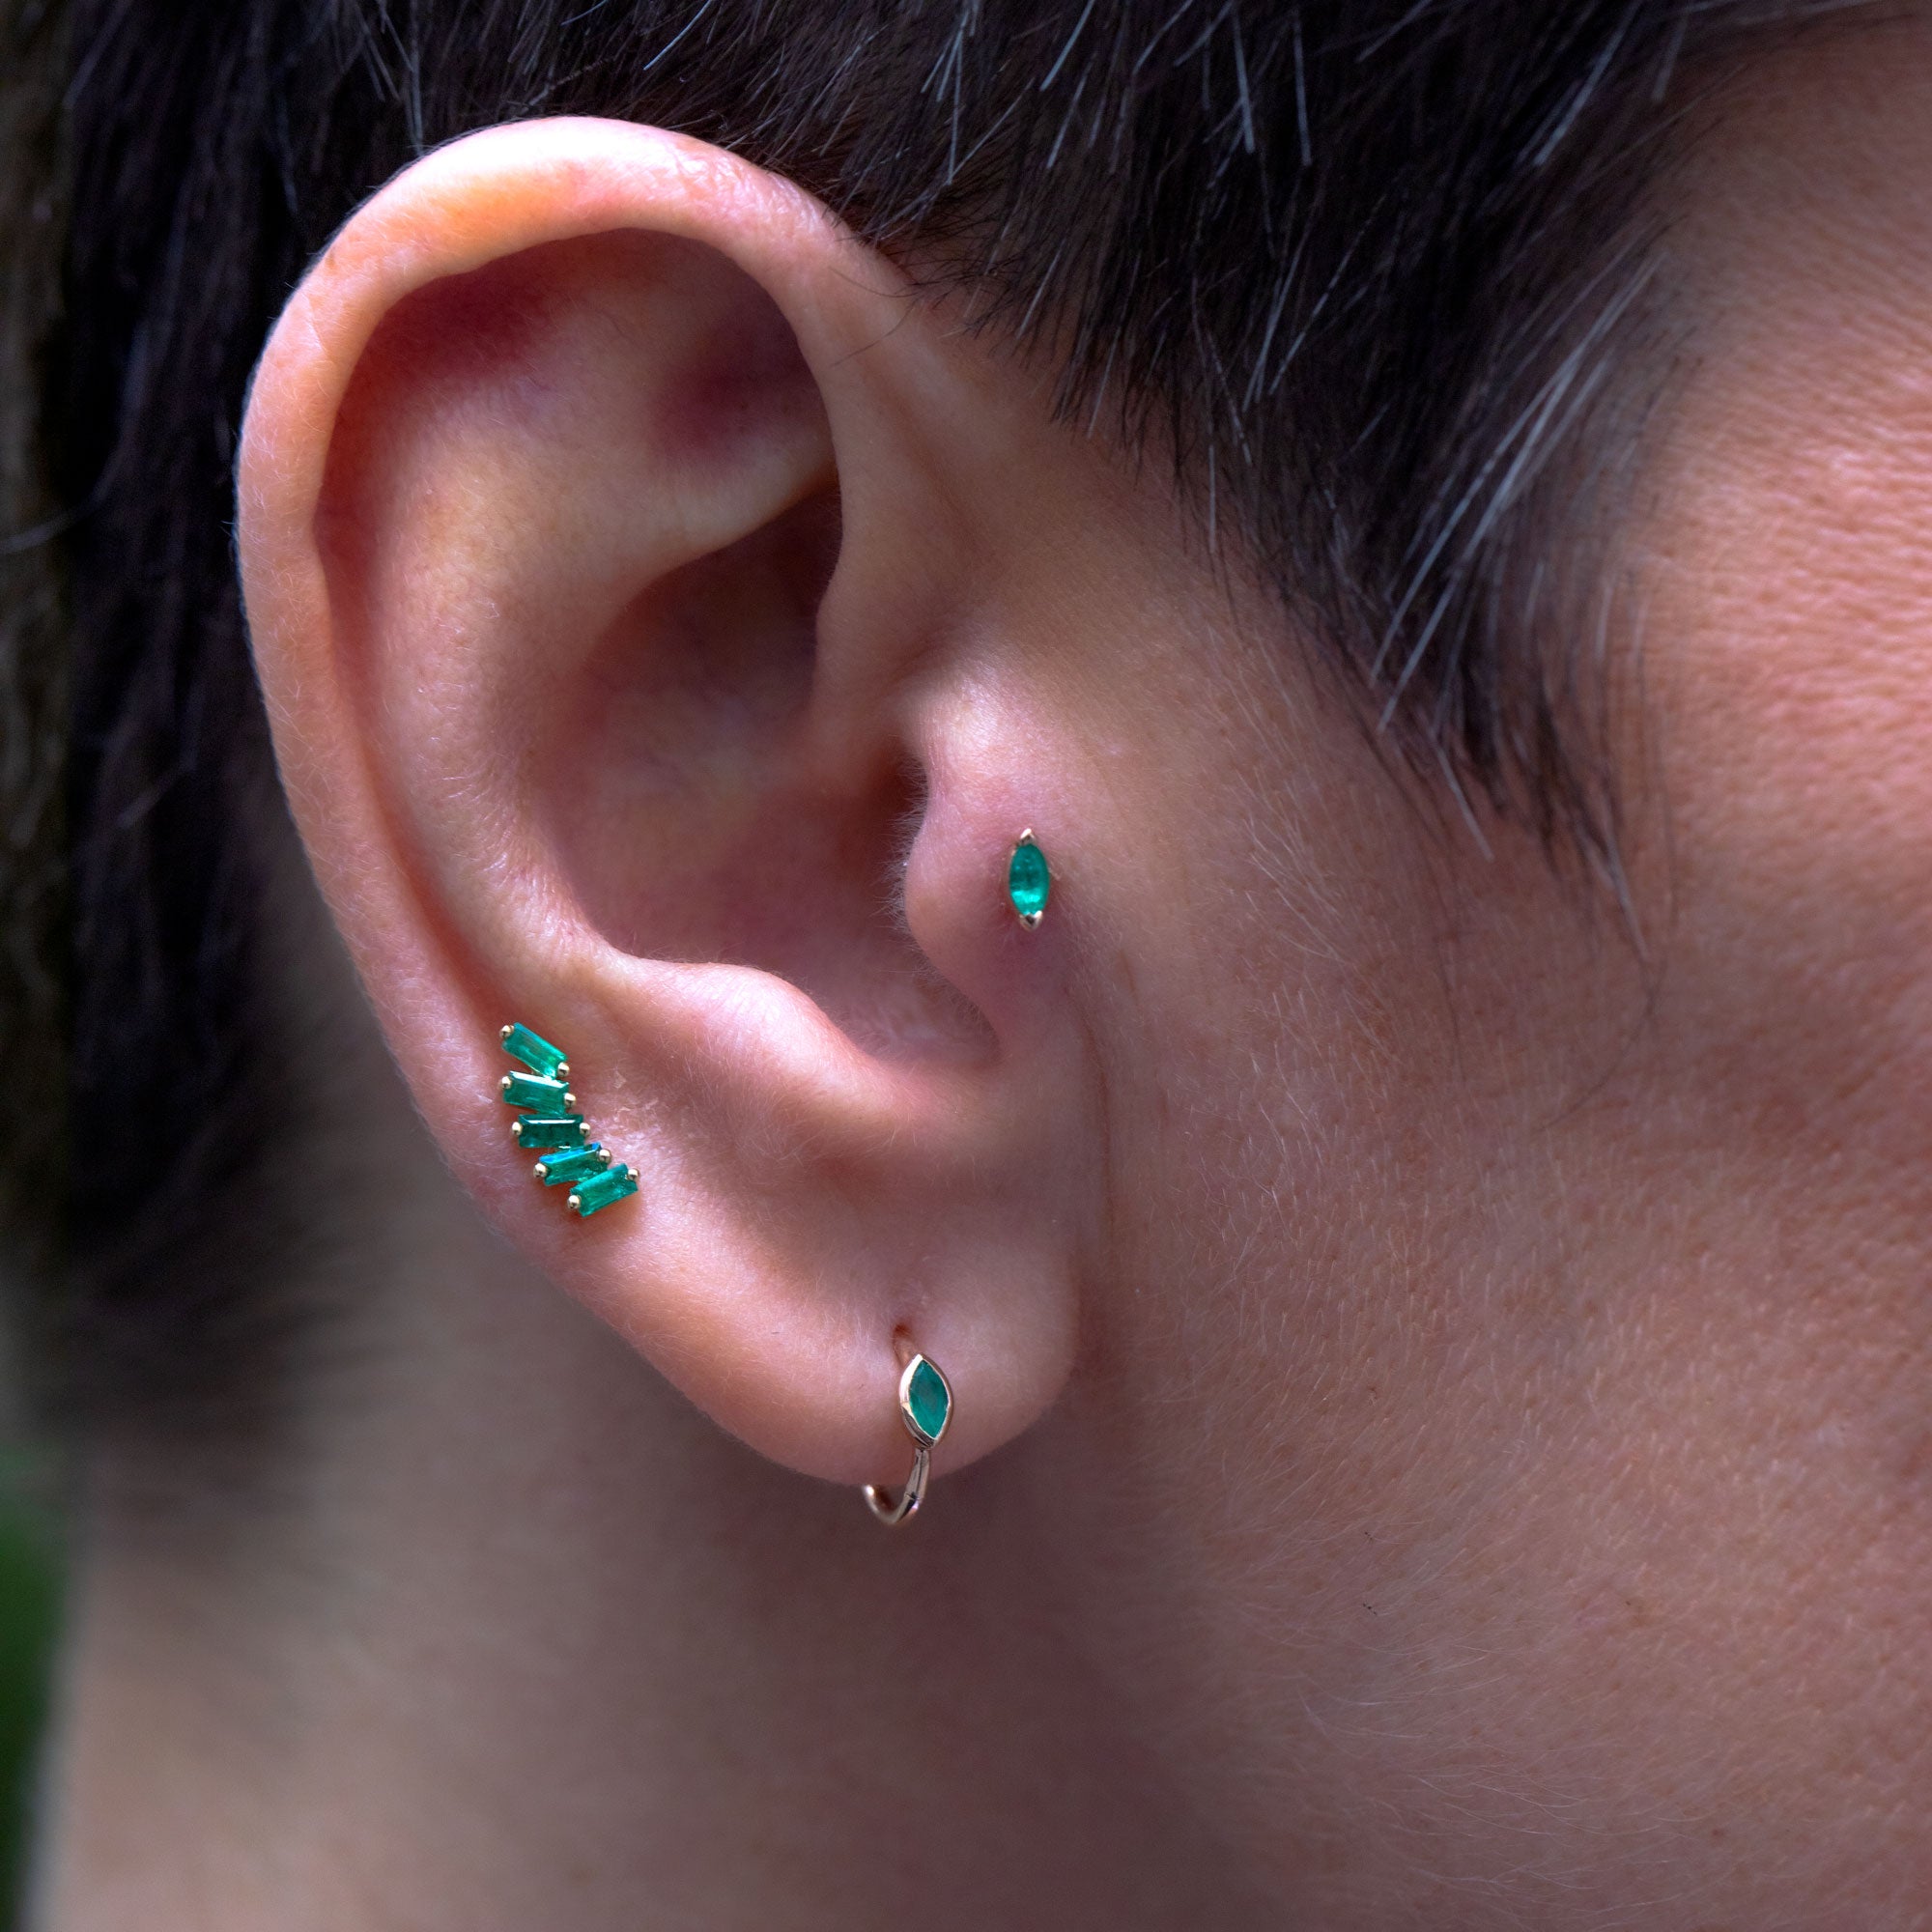 8mm Marquise Emerald 4.5x2mm Rose Gold Stud